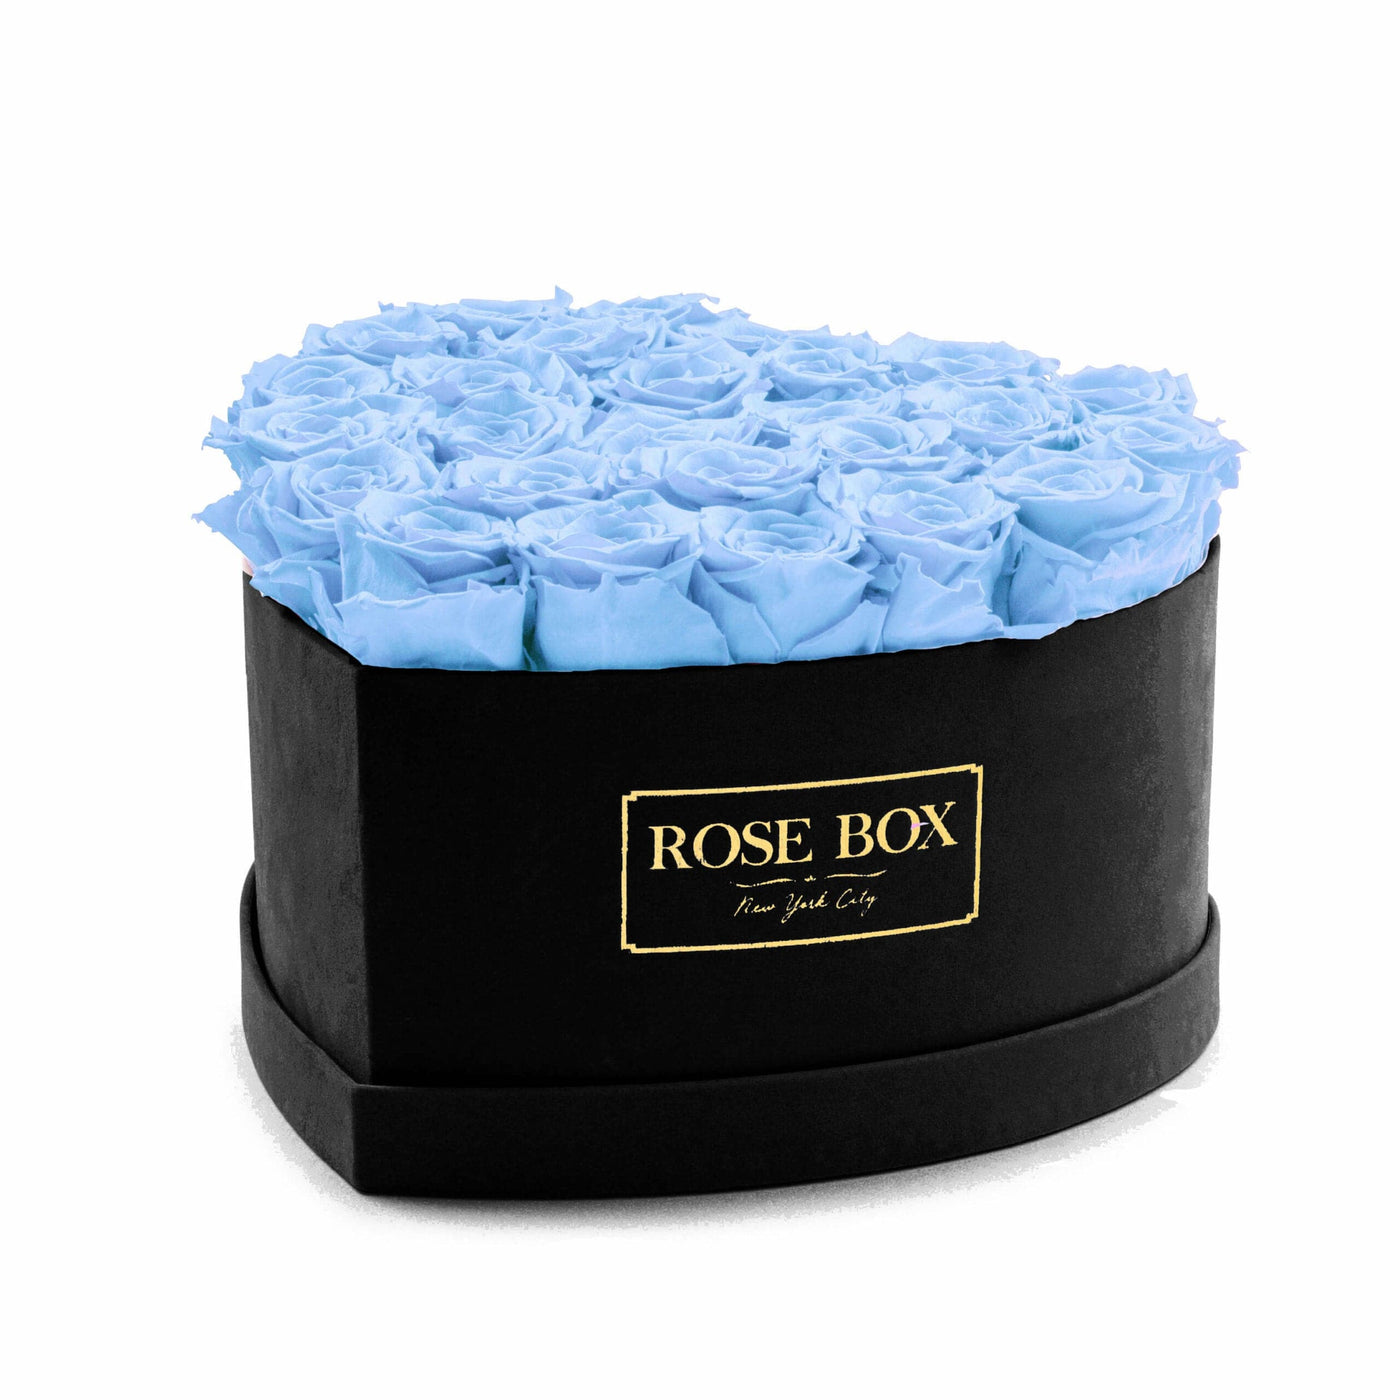 Large Black Heart Box with Light Blue Roses